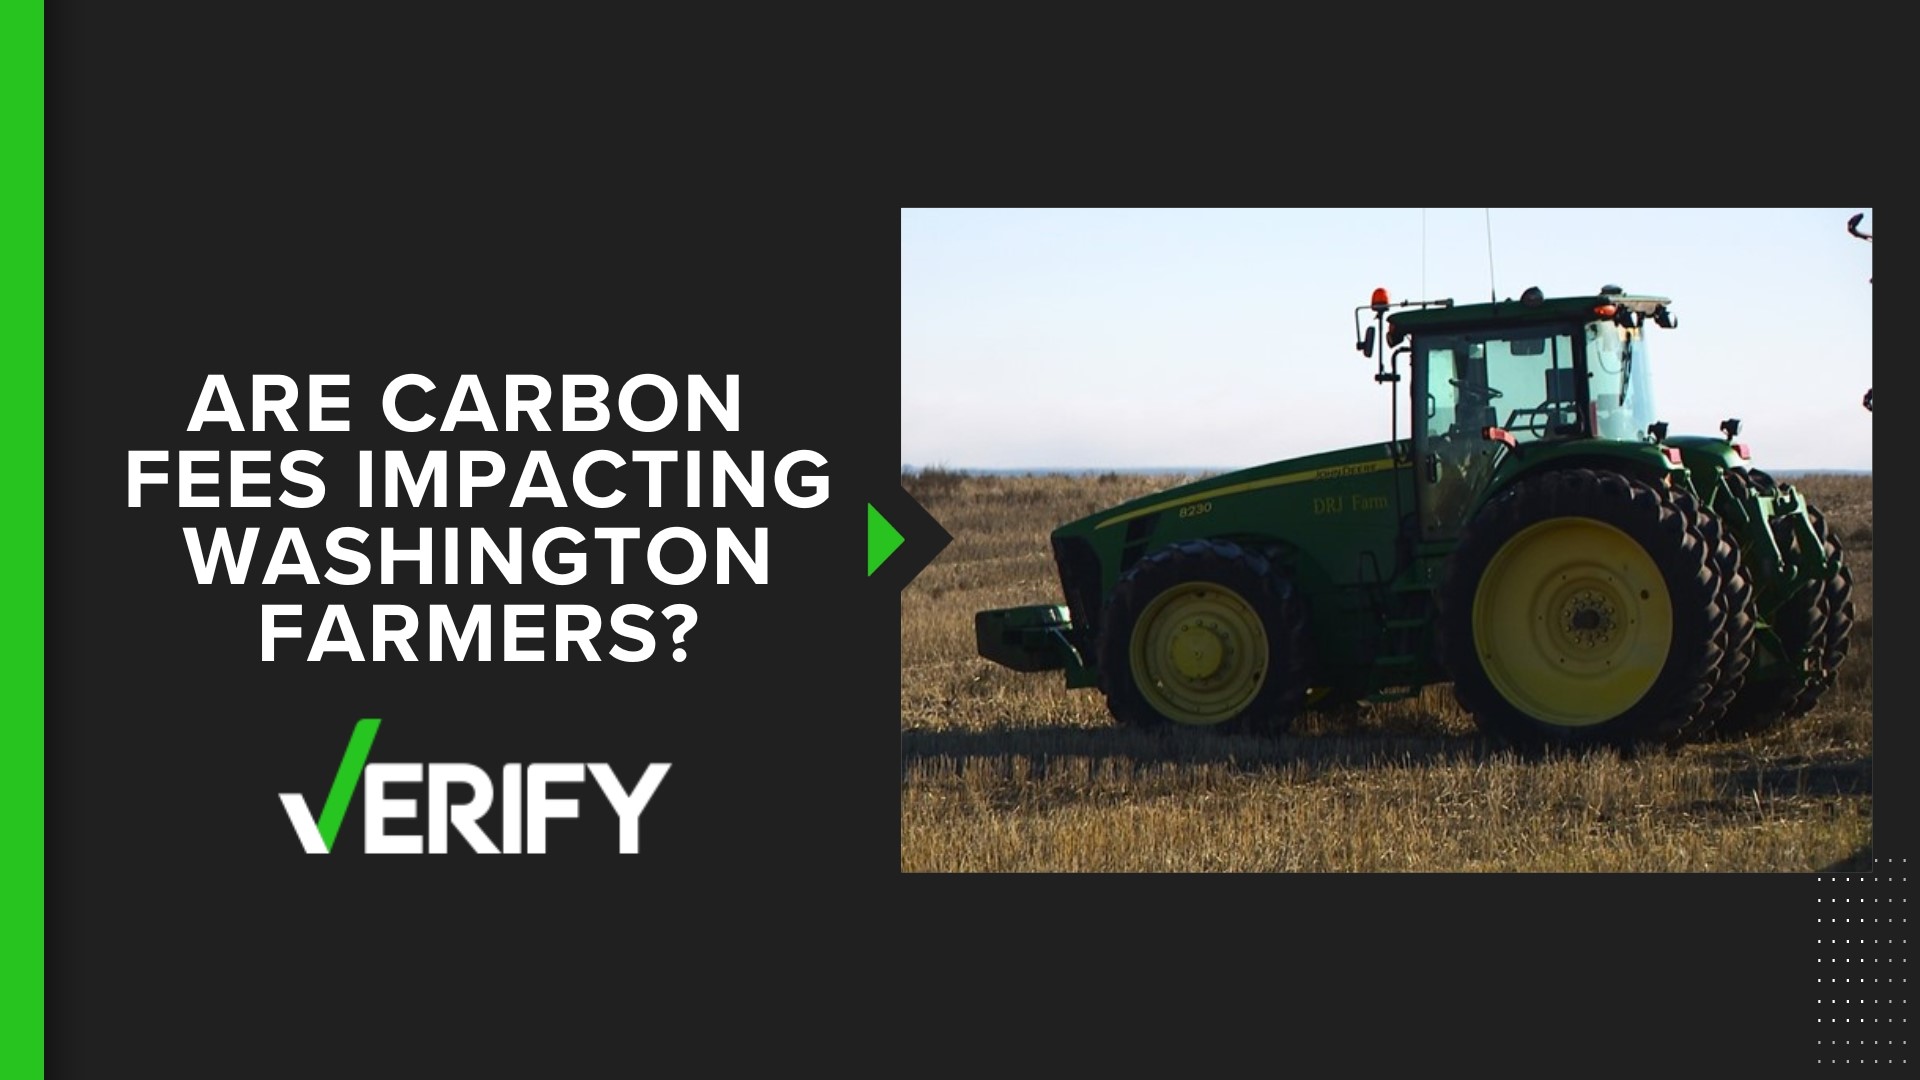 Washington farmers say carbon fee brought extra fuel costs